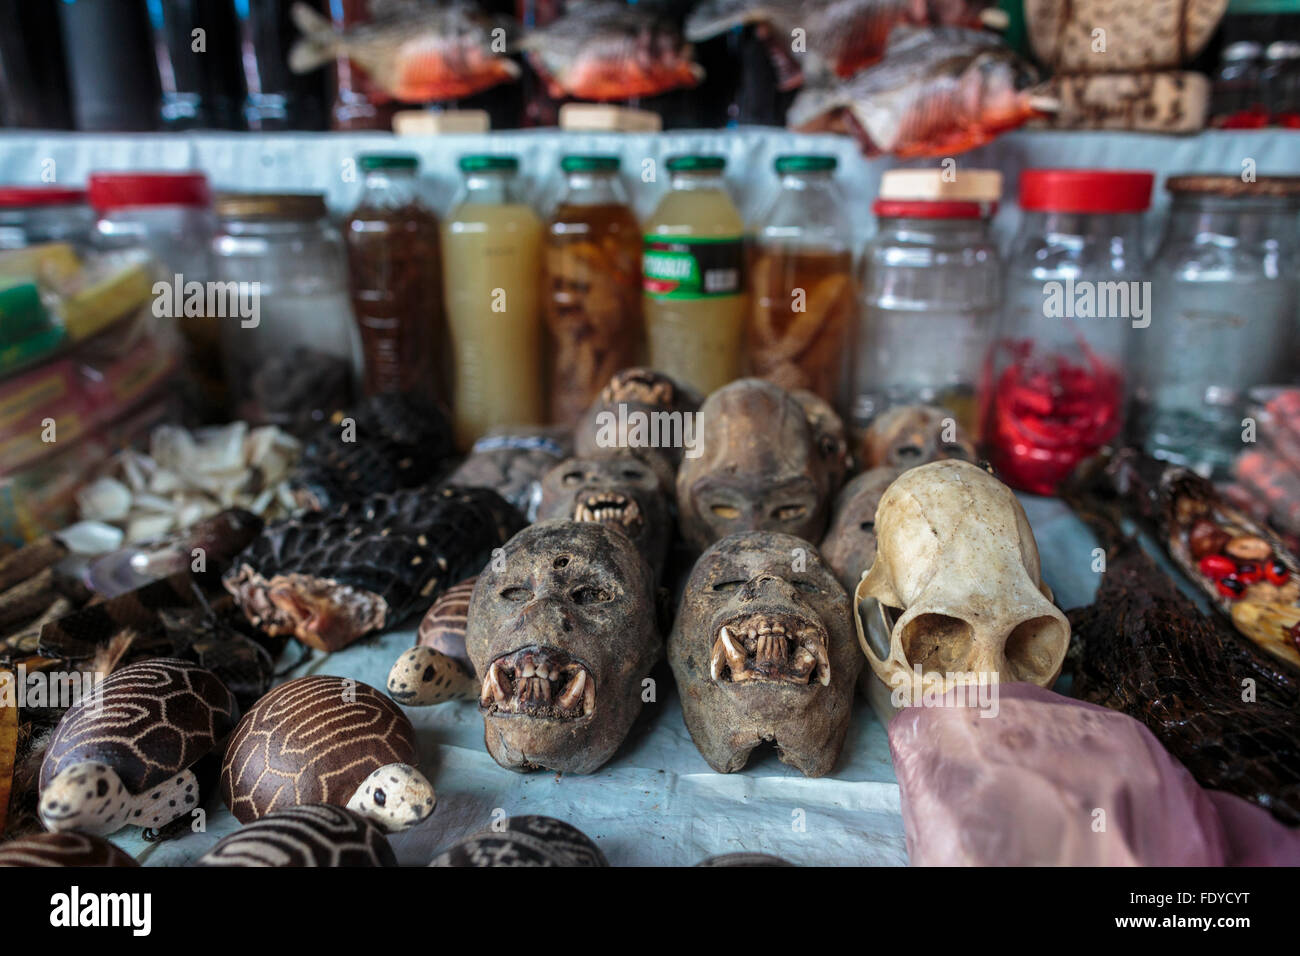 Monkey skulls, Crocodile Scales, Ayahuasca and bottles of plant extracts and medicine are for sale at Belen Market in Iquitos Stock Photo